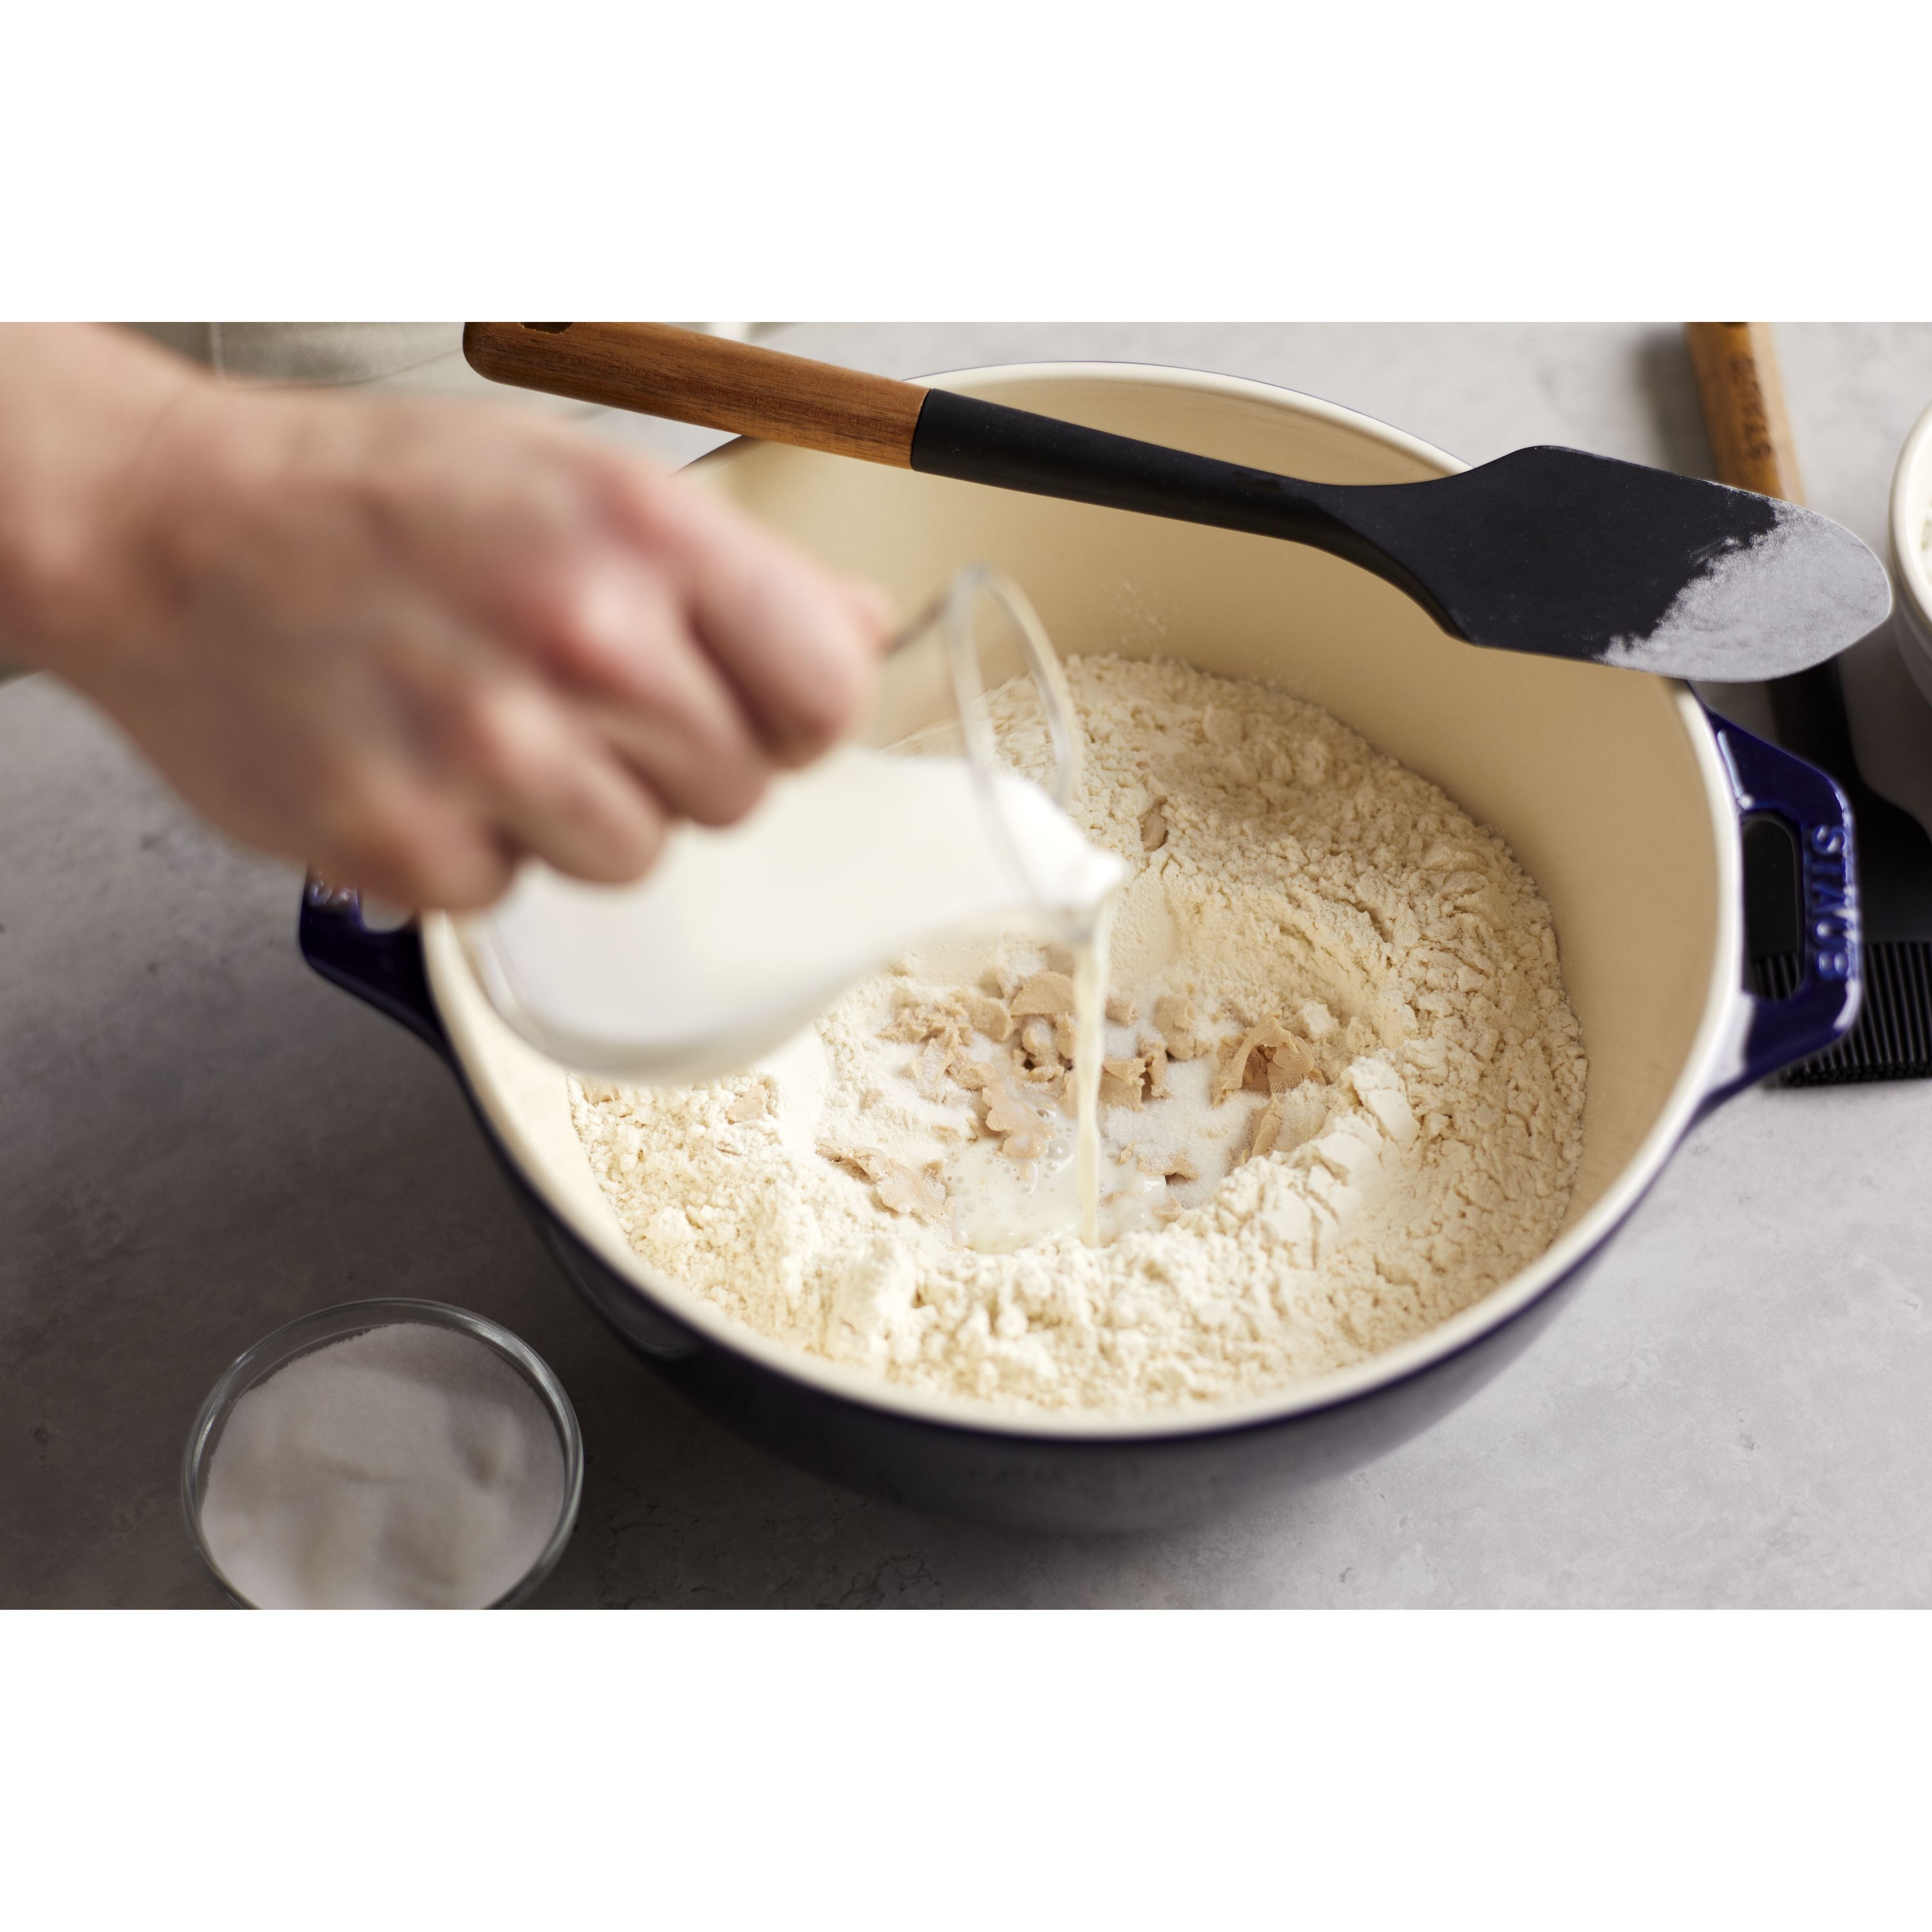 STAUB Silcone Spatula, Great for Mixing, Folding, Scraping, and Spreading,  Durable BPA-Free Matte Bl…See more STAUB Silcone Spatula, Great for Mixing